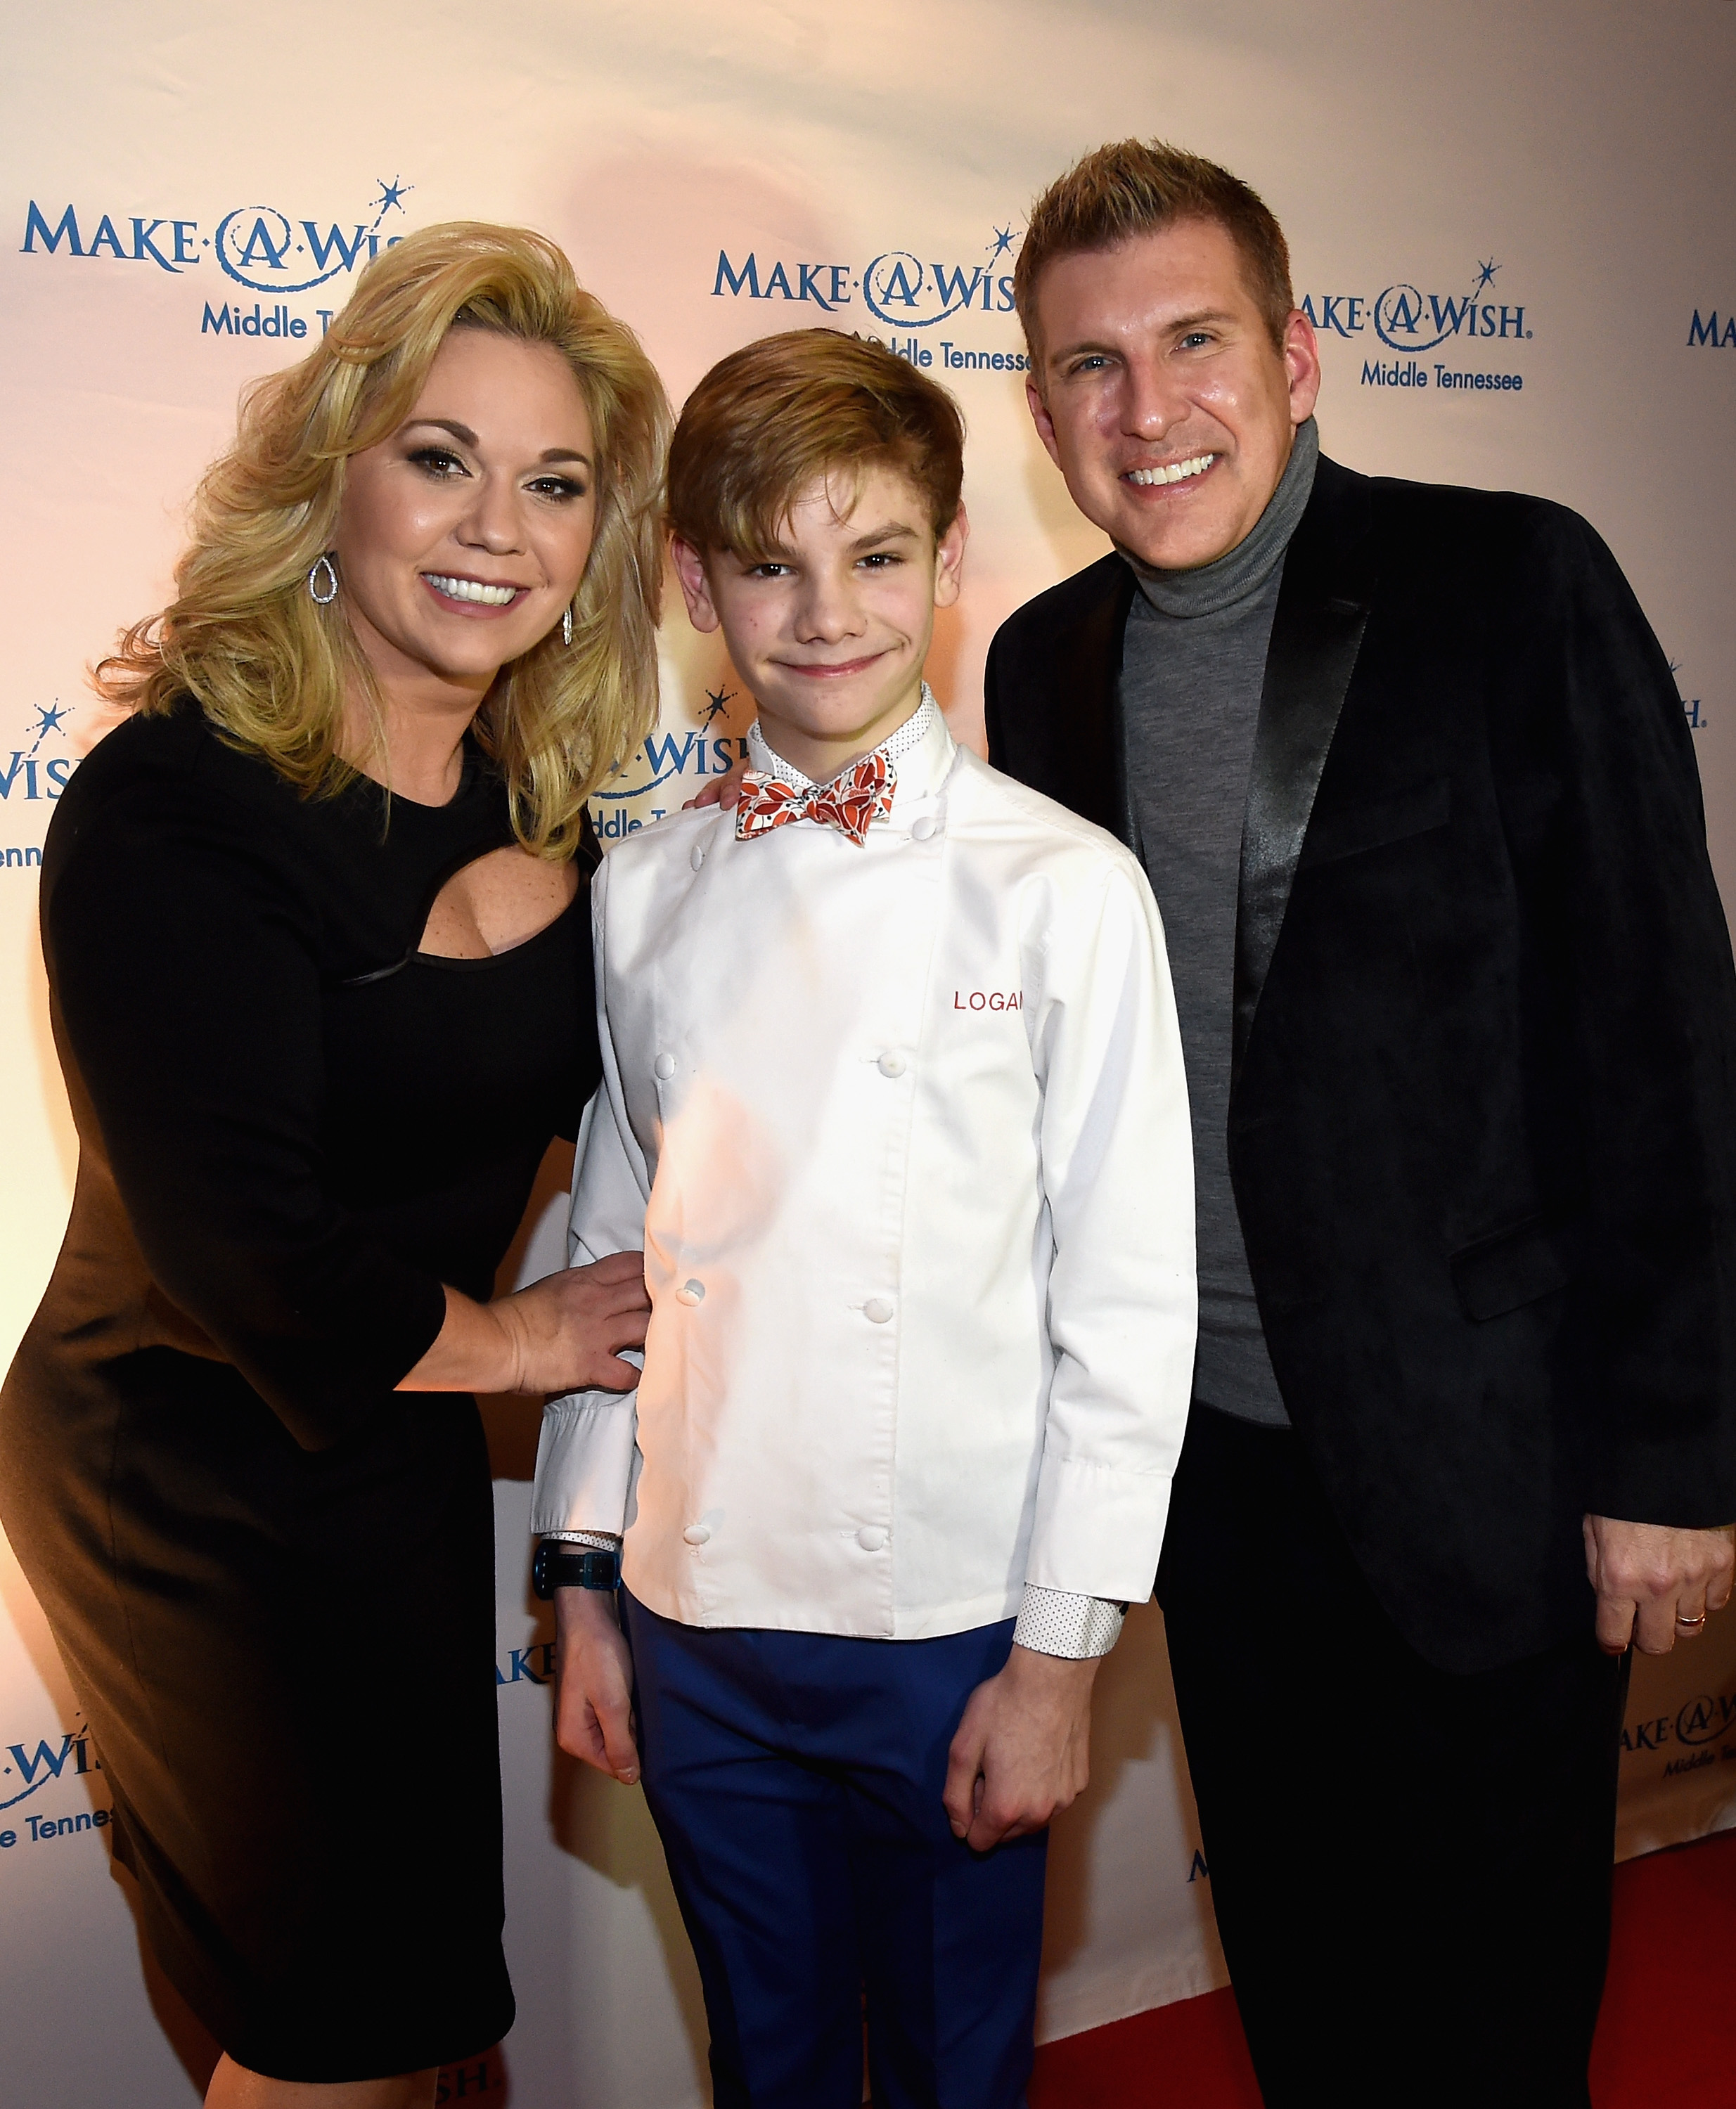 Julie Chrisley, Todd Chrisley’s Wife 5 Fast Facts You Need to Know